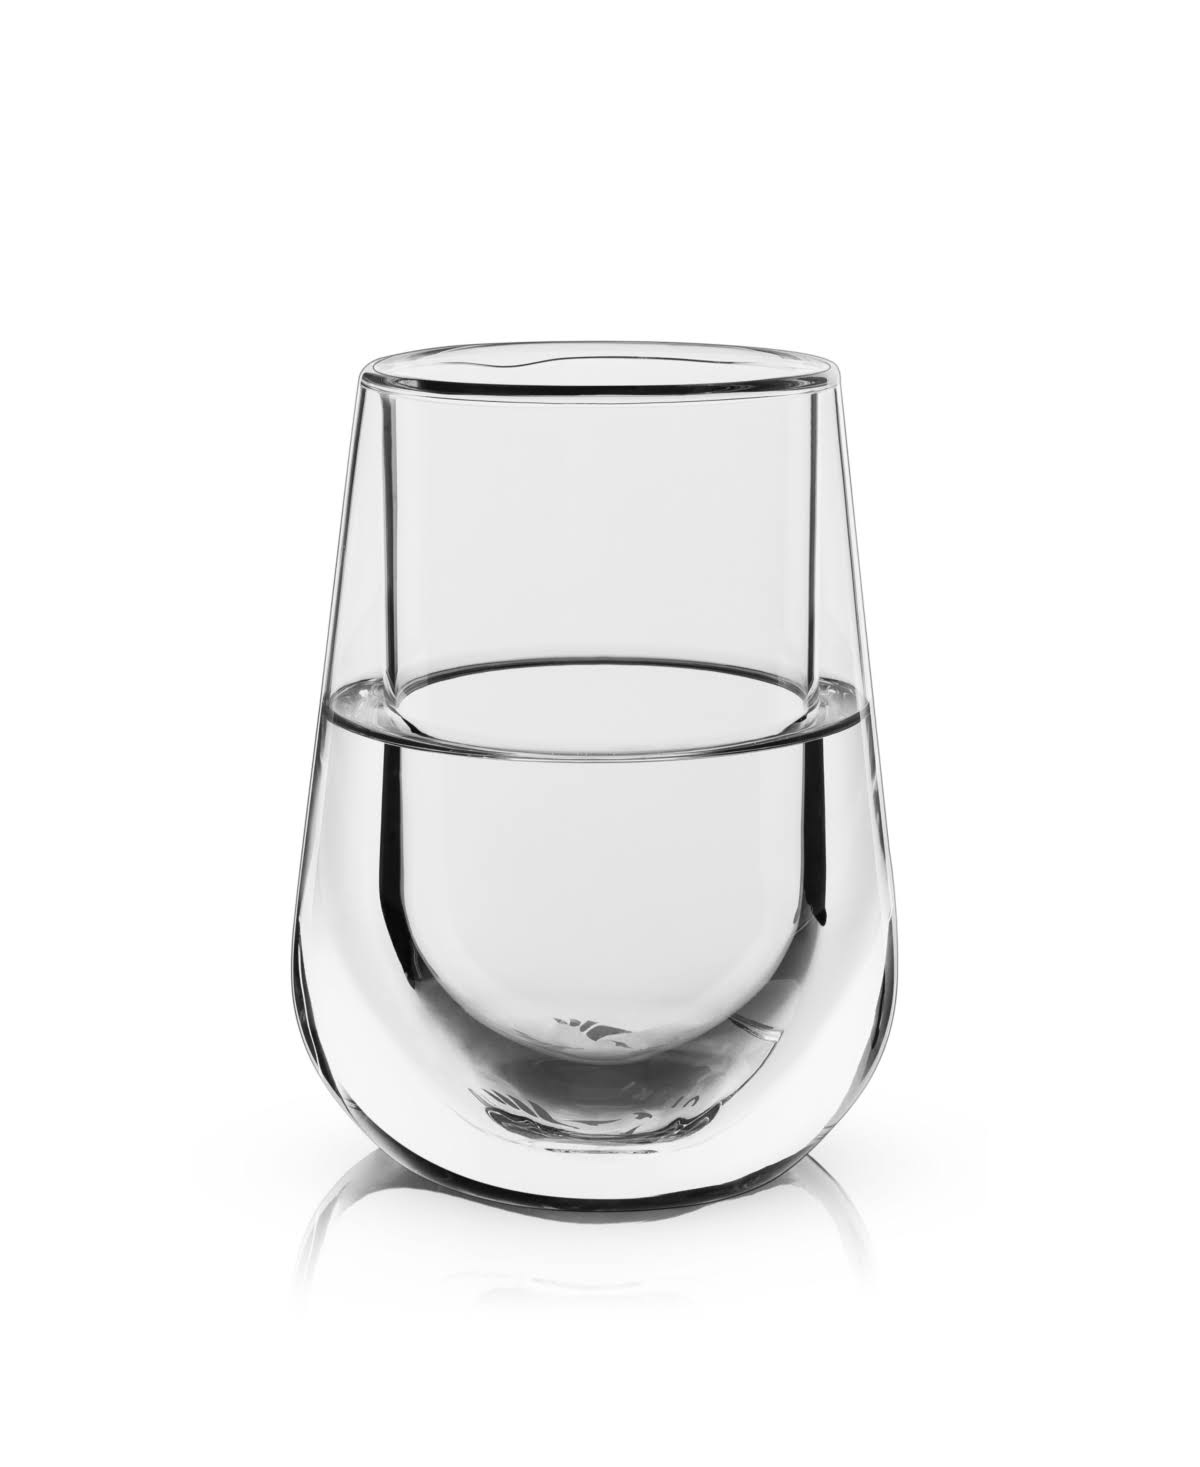 Double-Walled Chiling Wine Glass